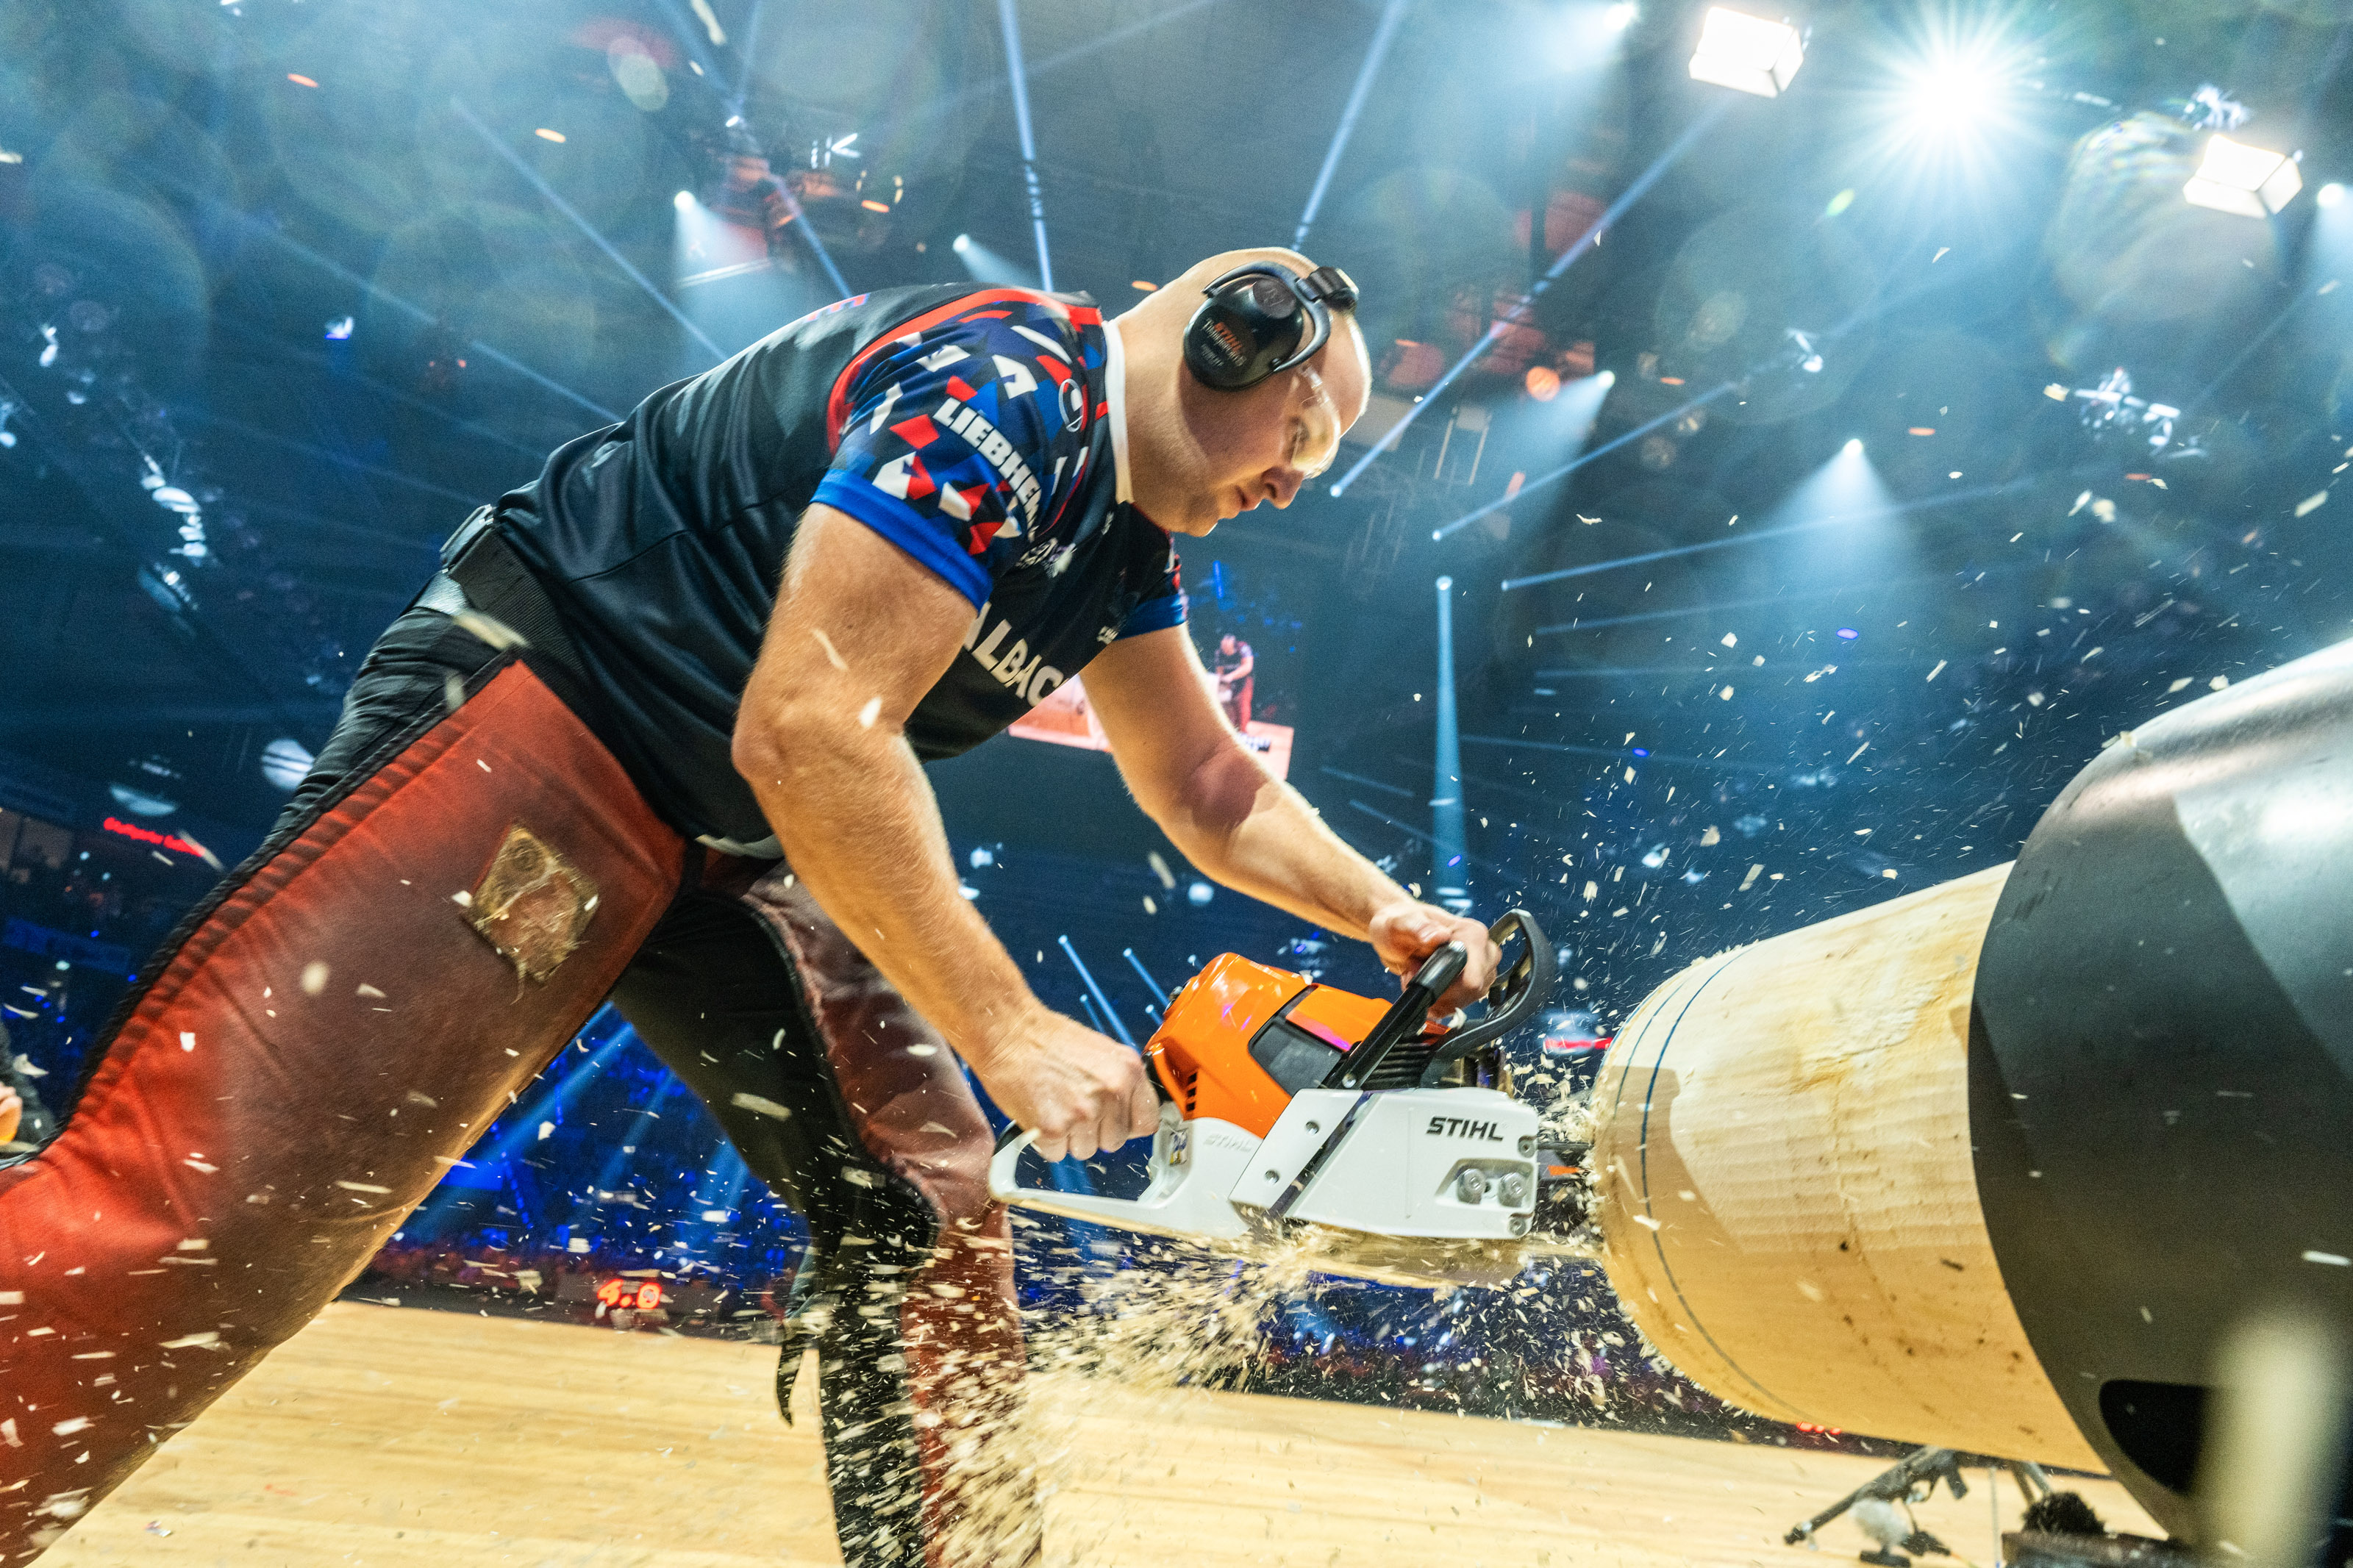 Pierre Puybaret, taking on the Stock Saw, has always represented France in individual competitions in recent years. As the host nation, the French national Pro champion of 2024 will be guaranteed a spot in Toulouse.